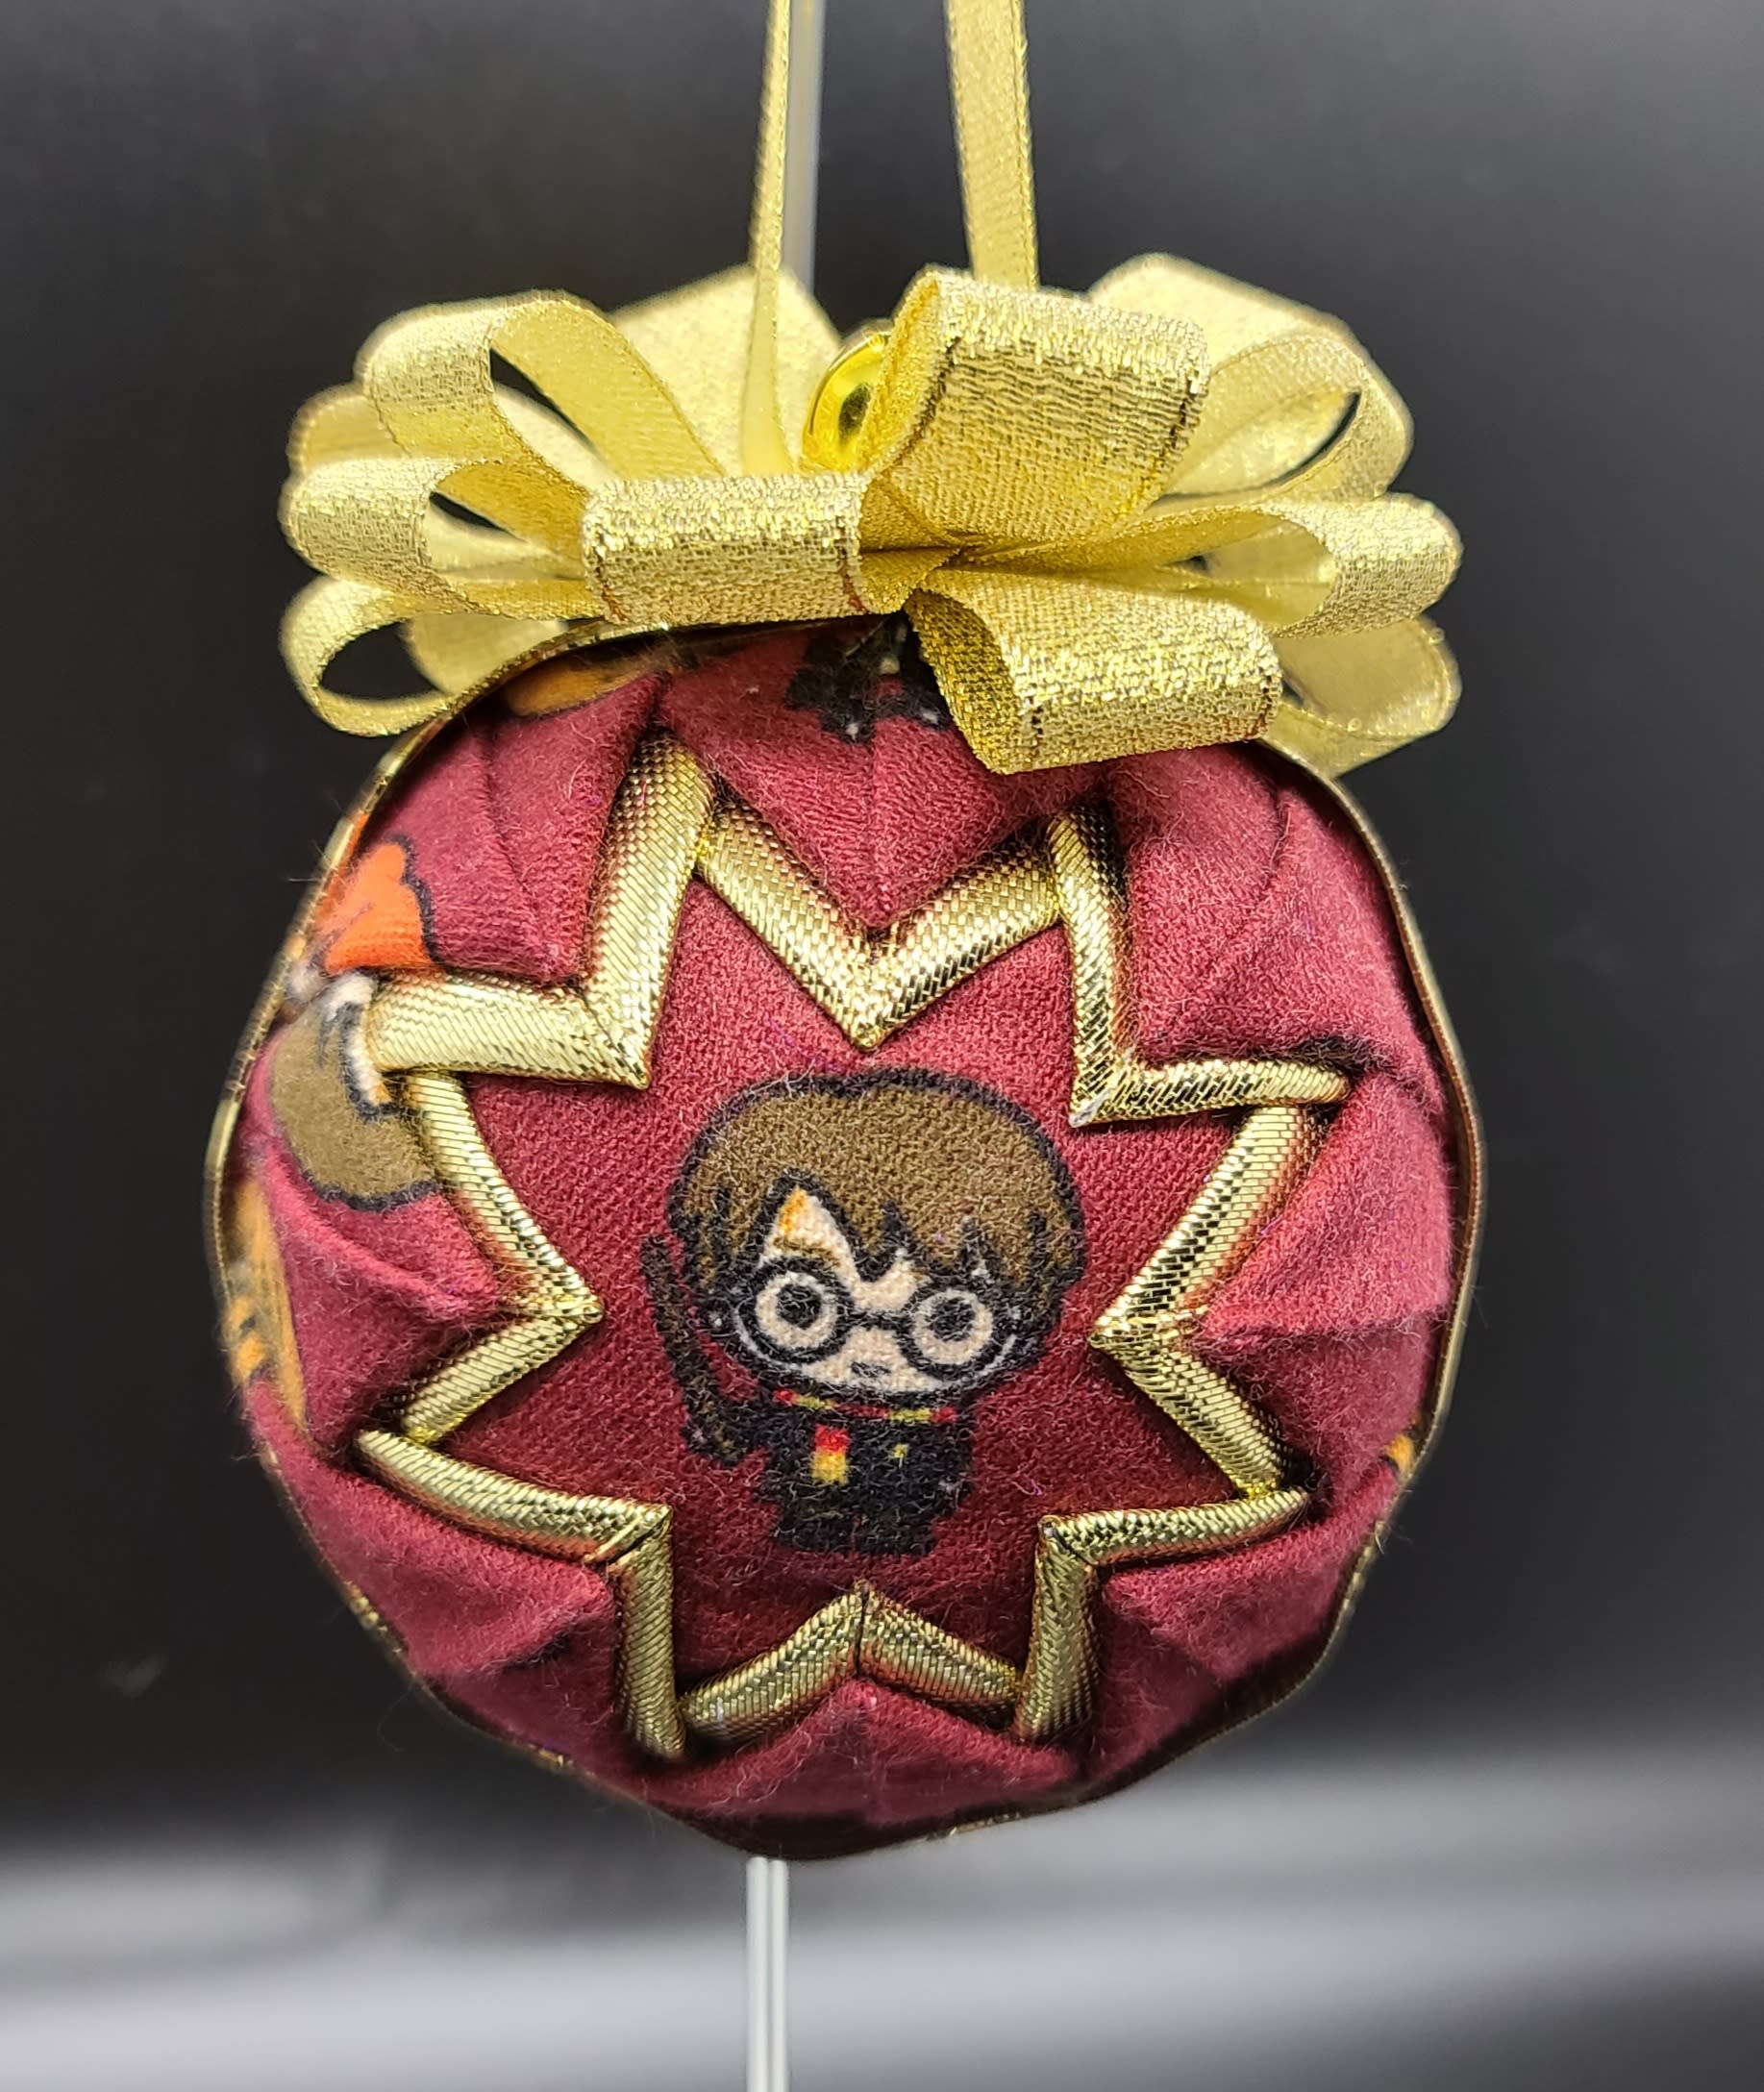 Kweh! Get the SQUARE ENIX holiday ornament while supplies last! - Square  Enix